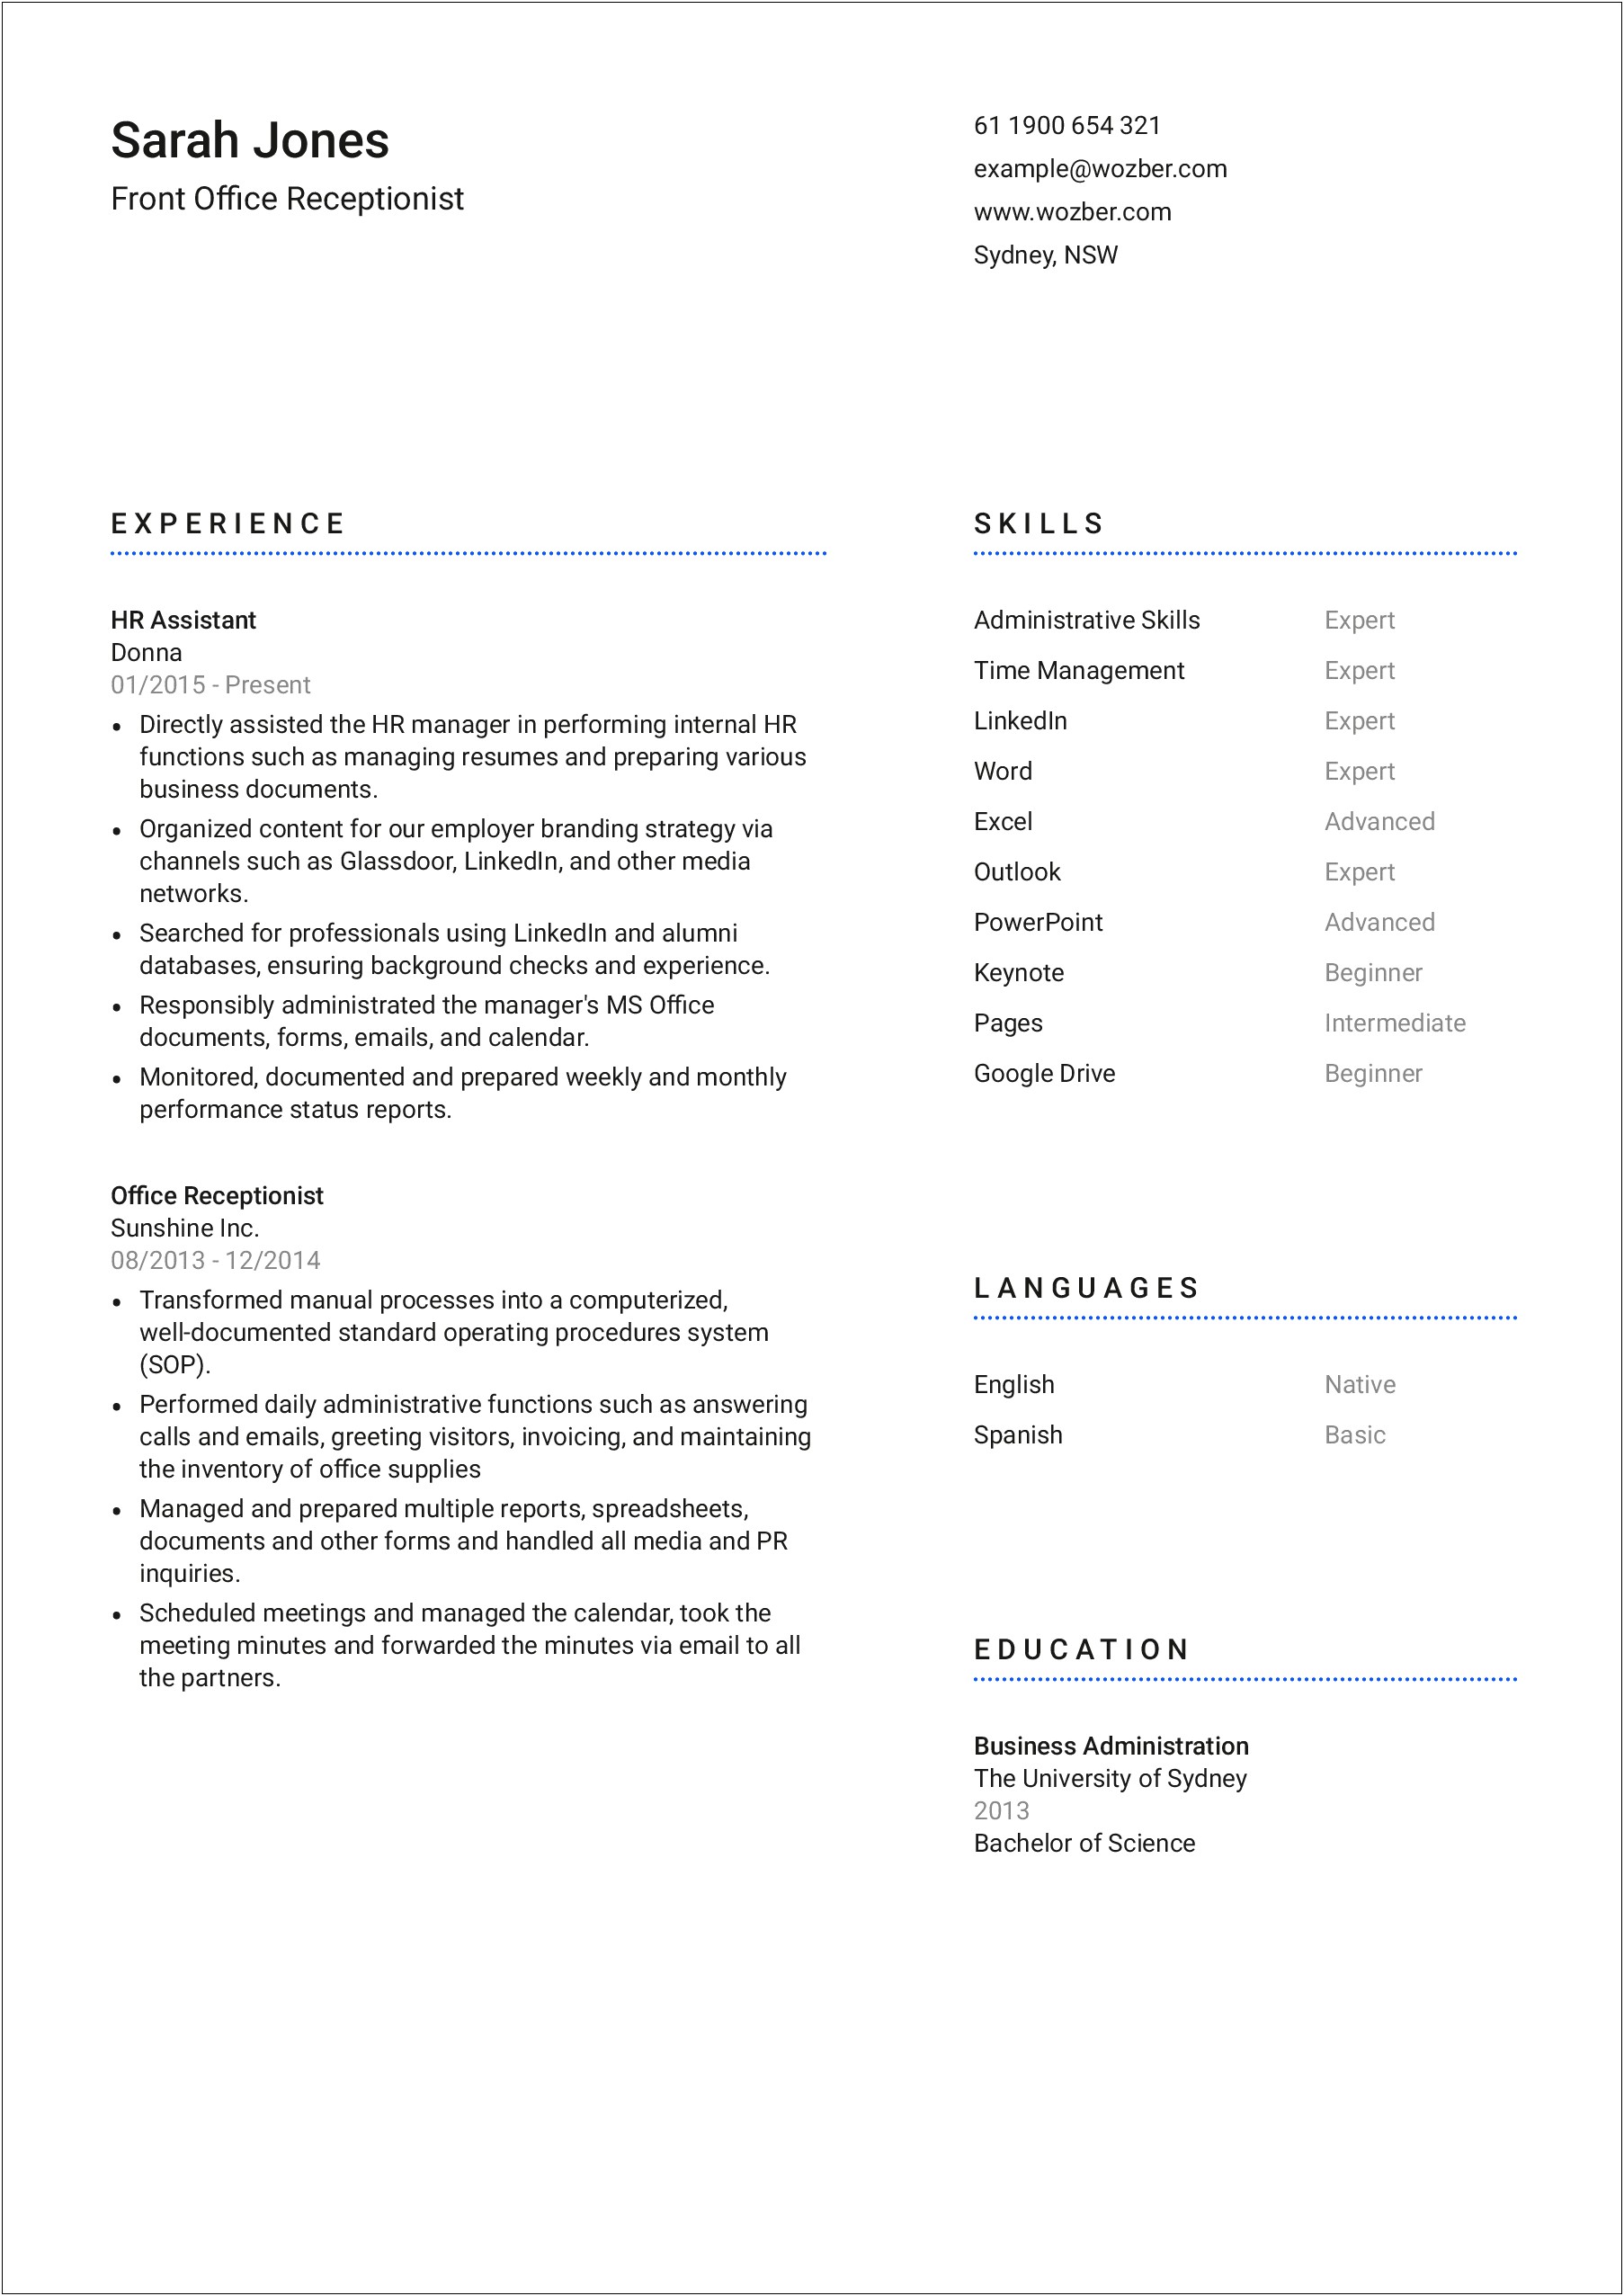 Skill Sets For Resumes Example